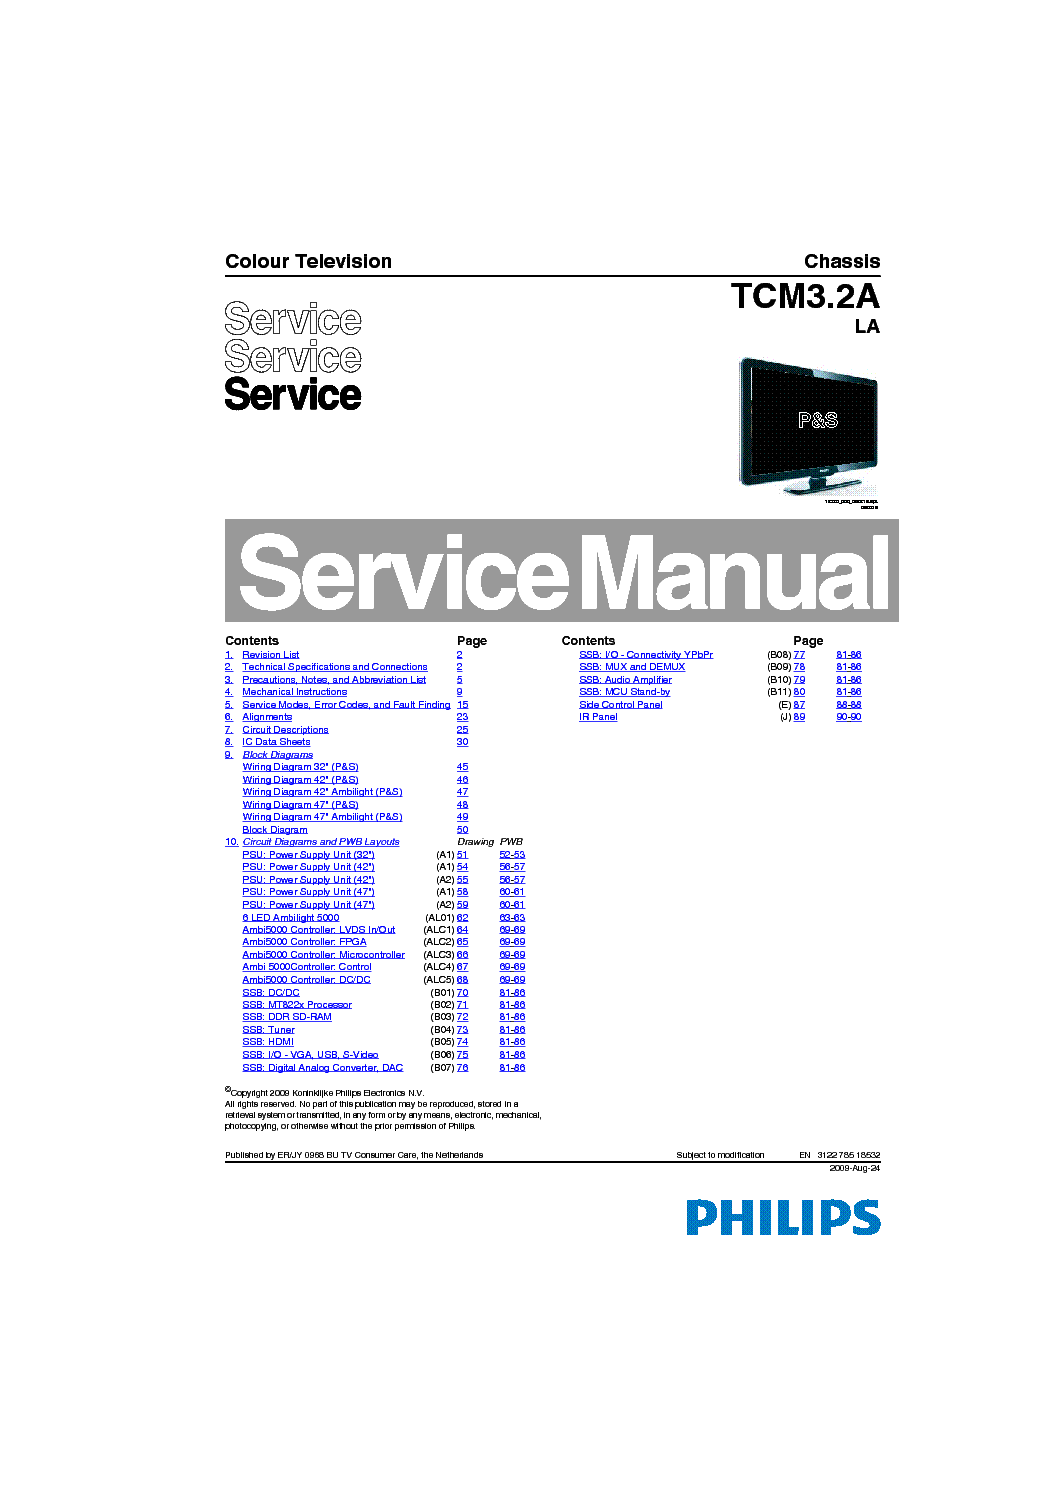 PHILIPS TCM3.2A LA CHASSIS LCD TV SM service manual (1st page)